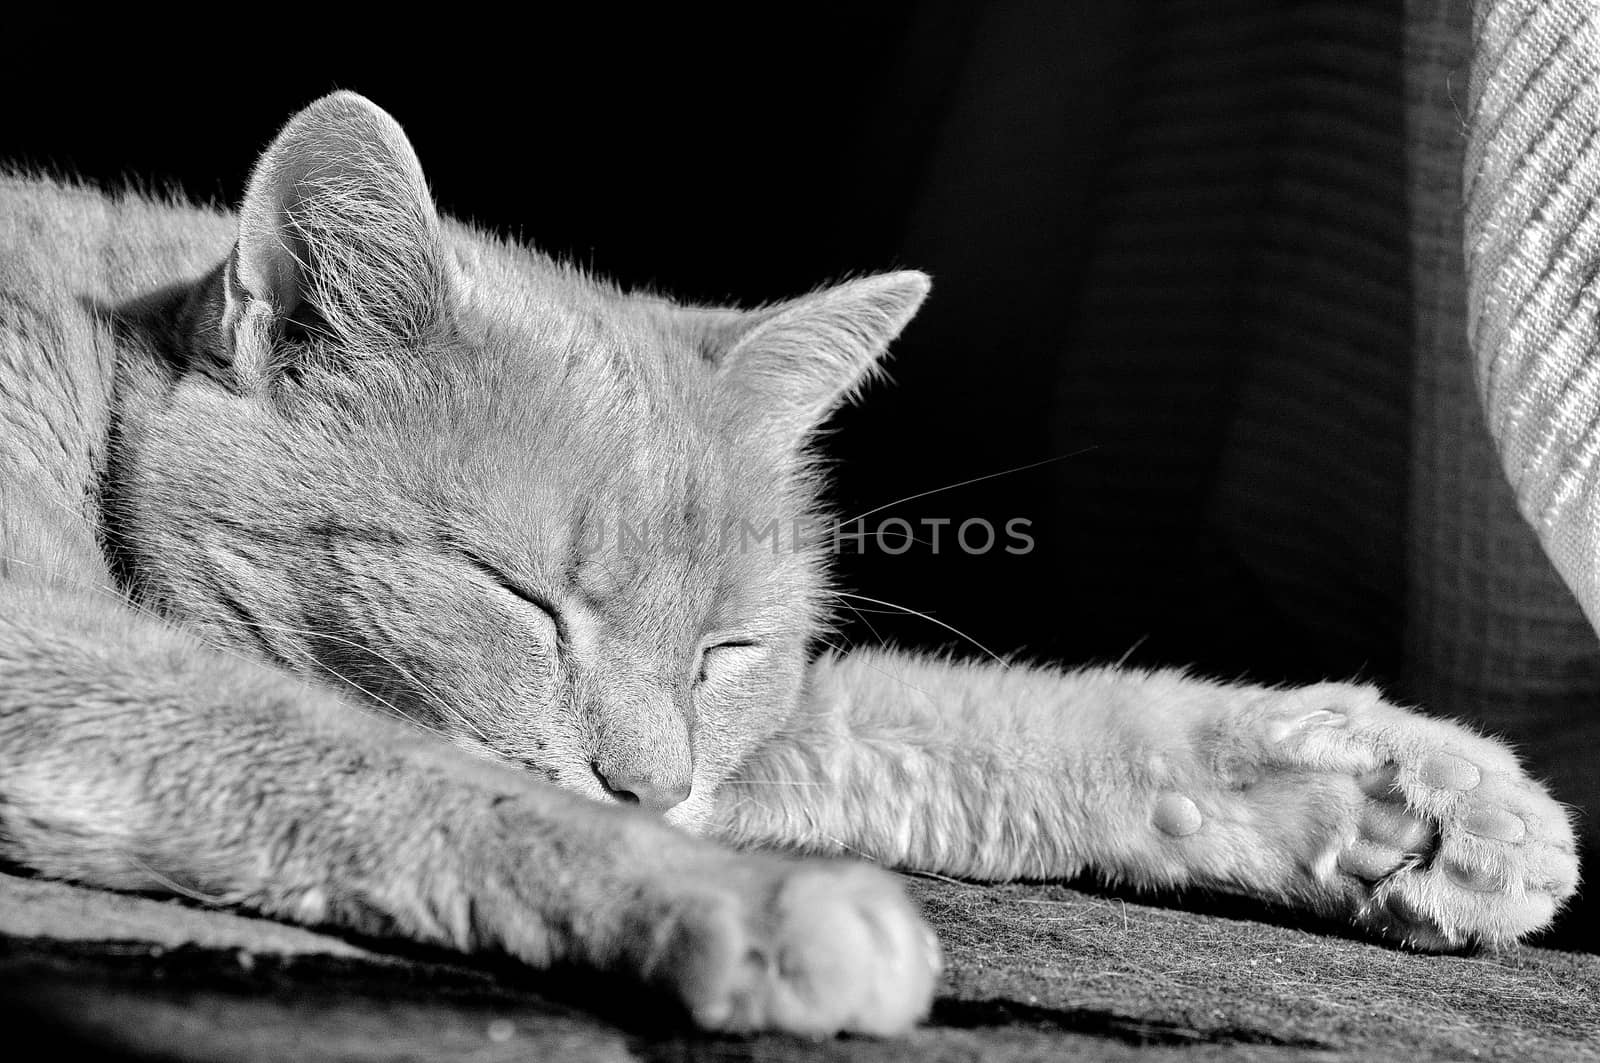 Cat sleeping by anderm